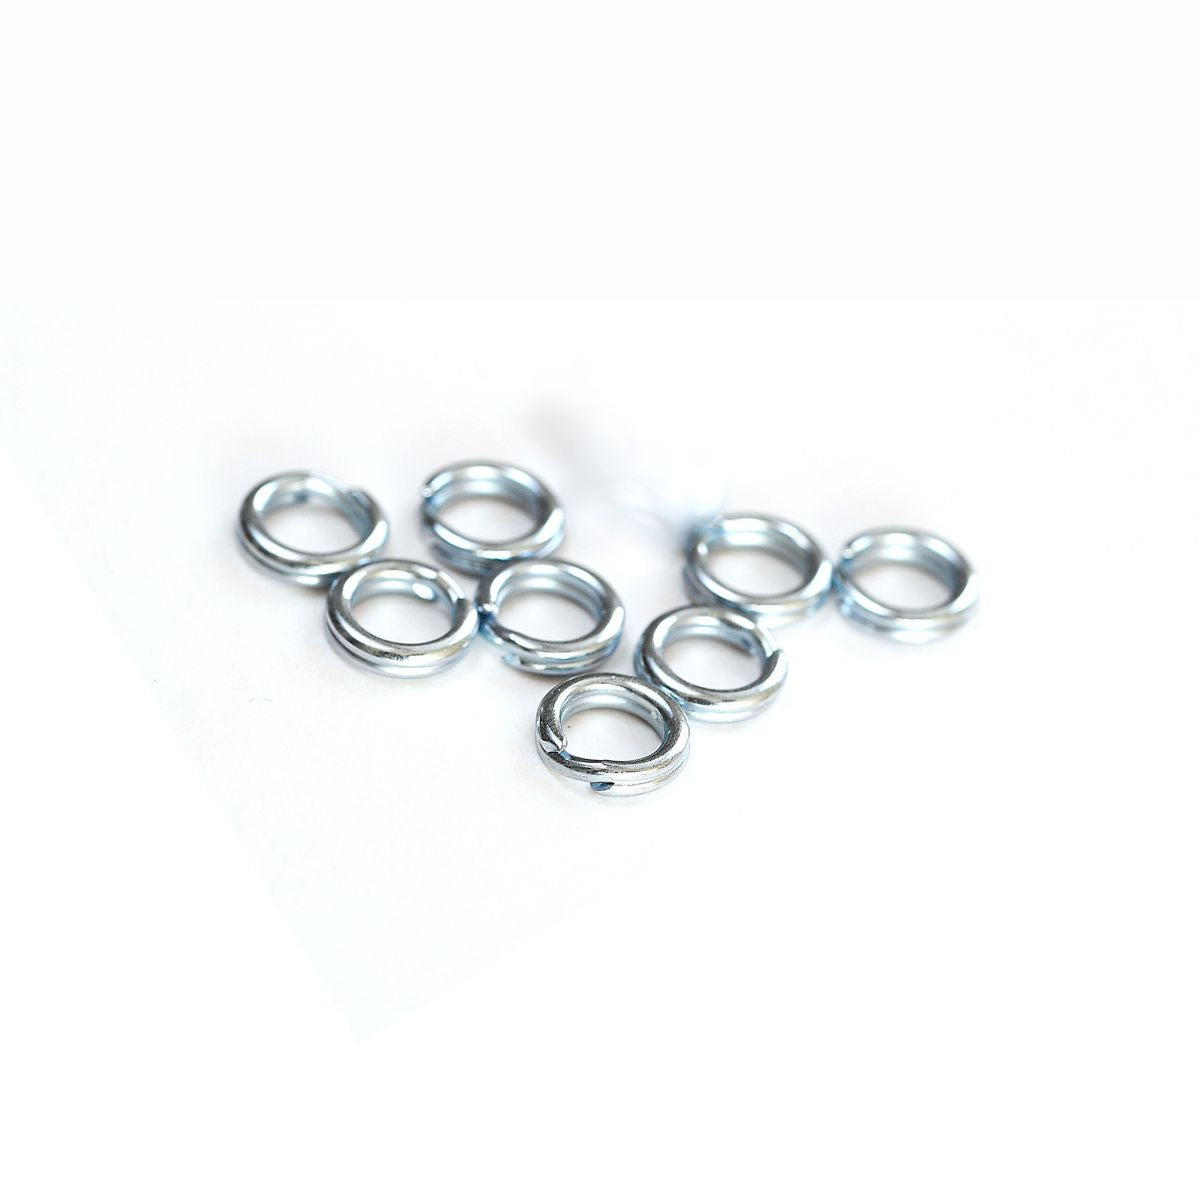 Fishing Split Rings,  8 Pack - South East Clearance Centre